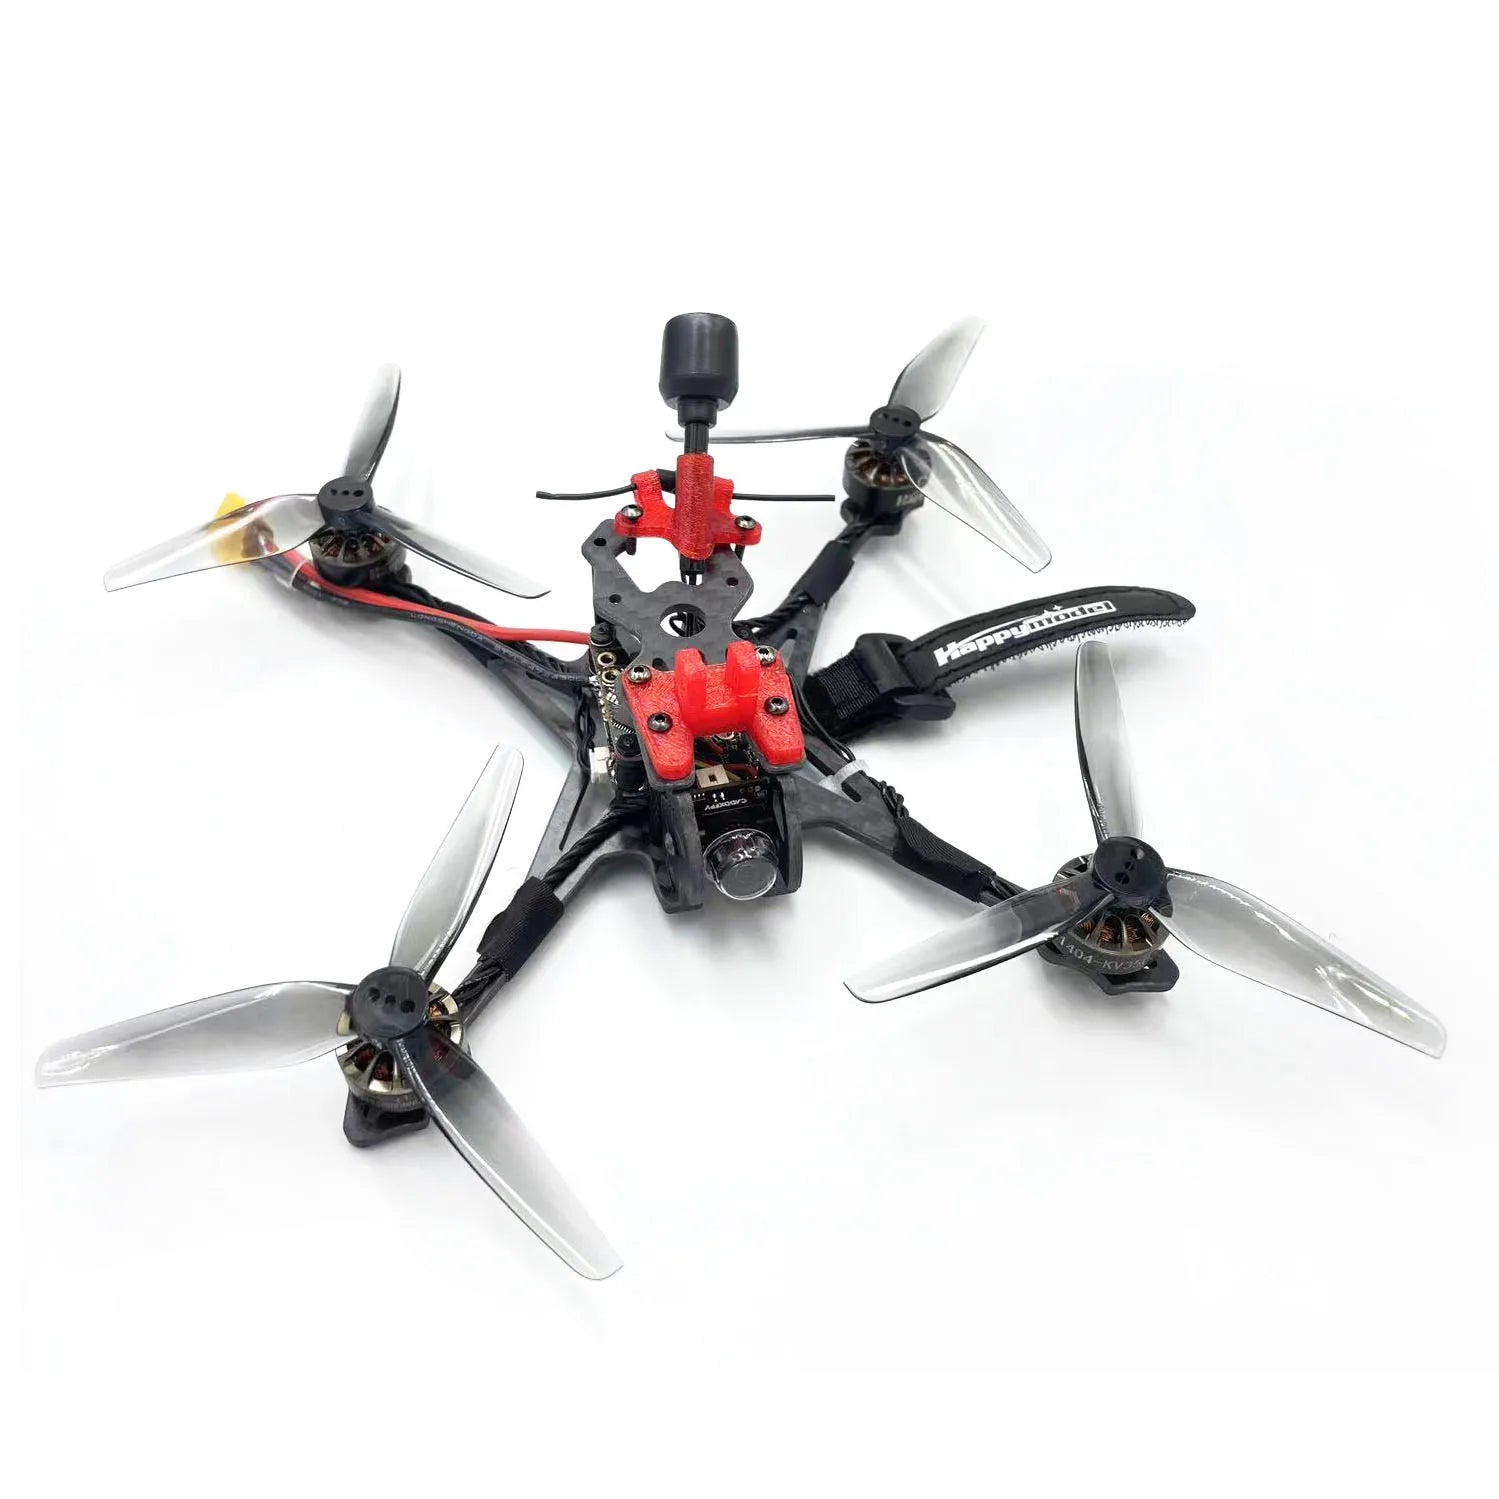 HappyModel Crux35, the analog version is equipped with CADDXFPV Ant ant camera